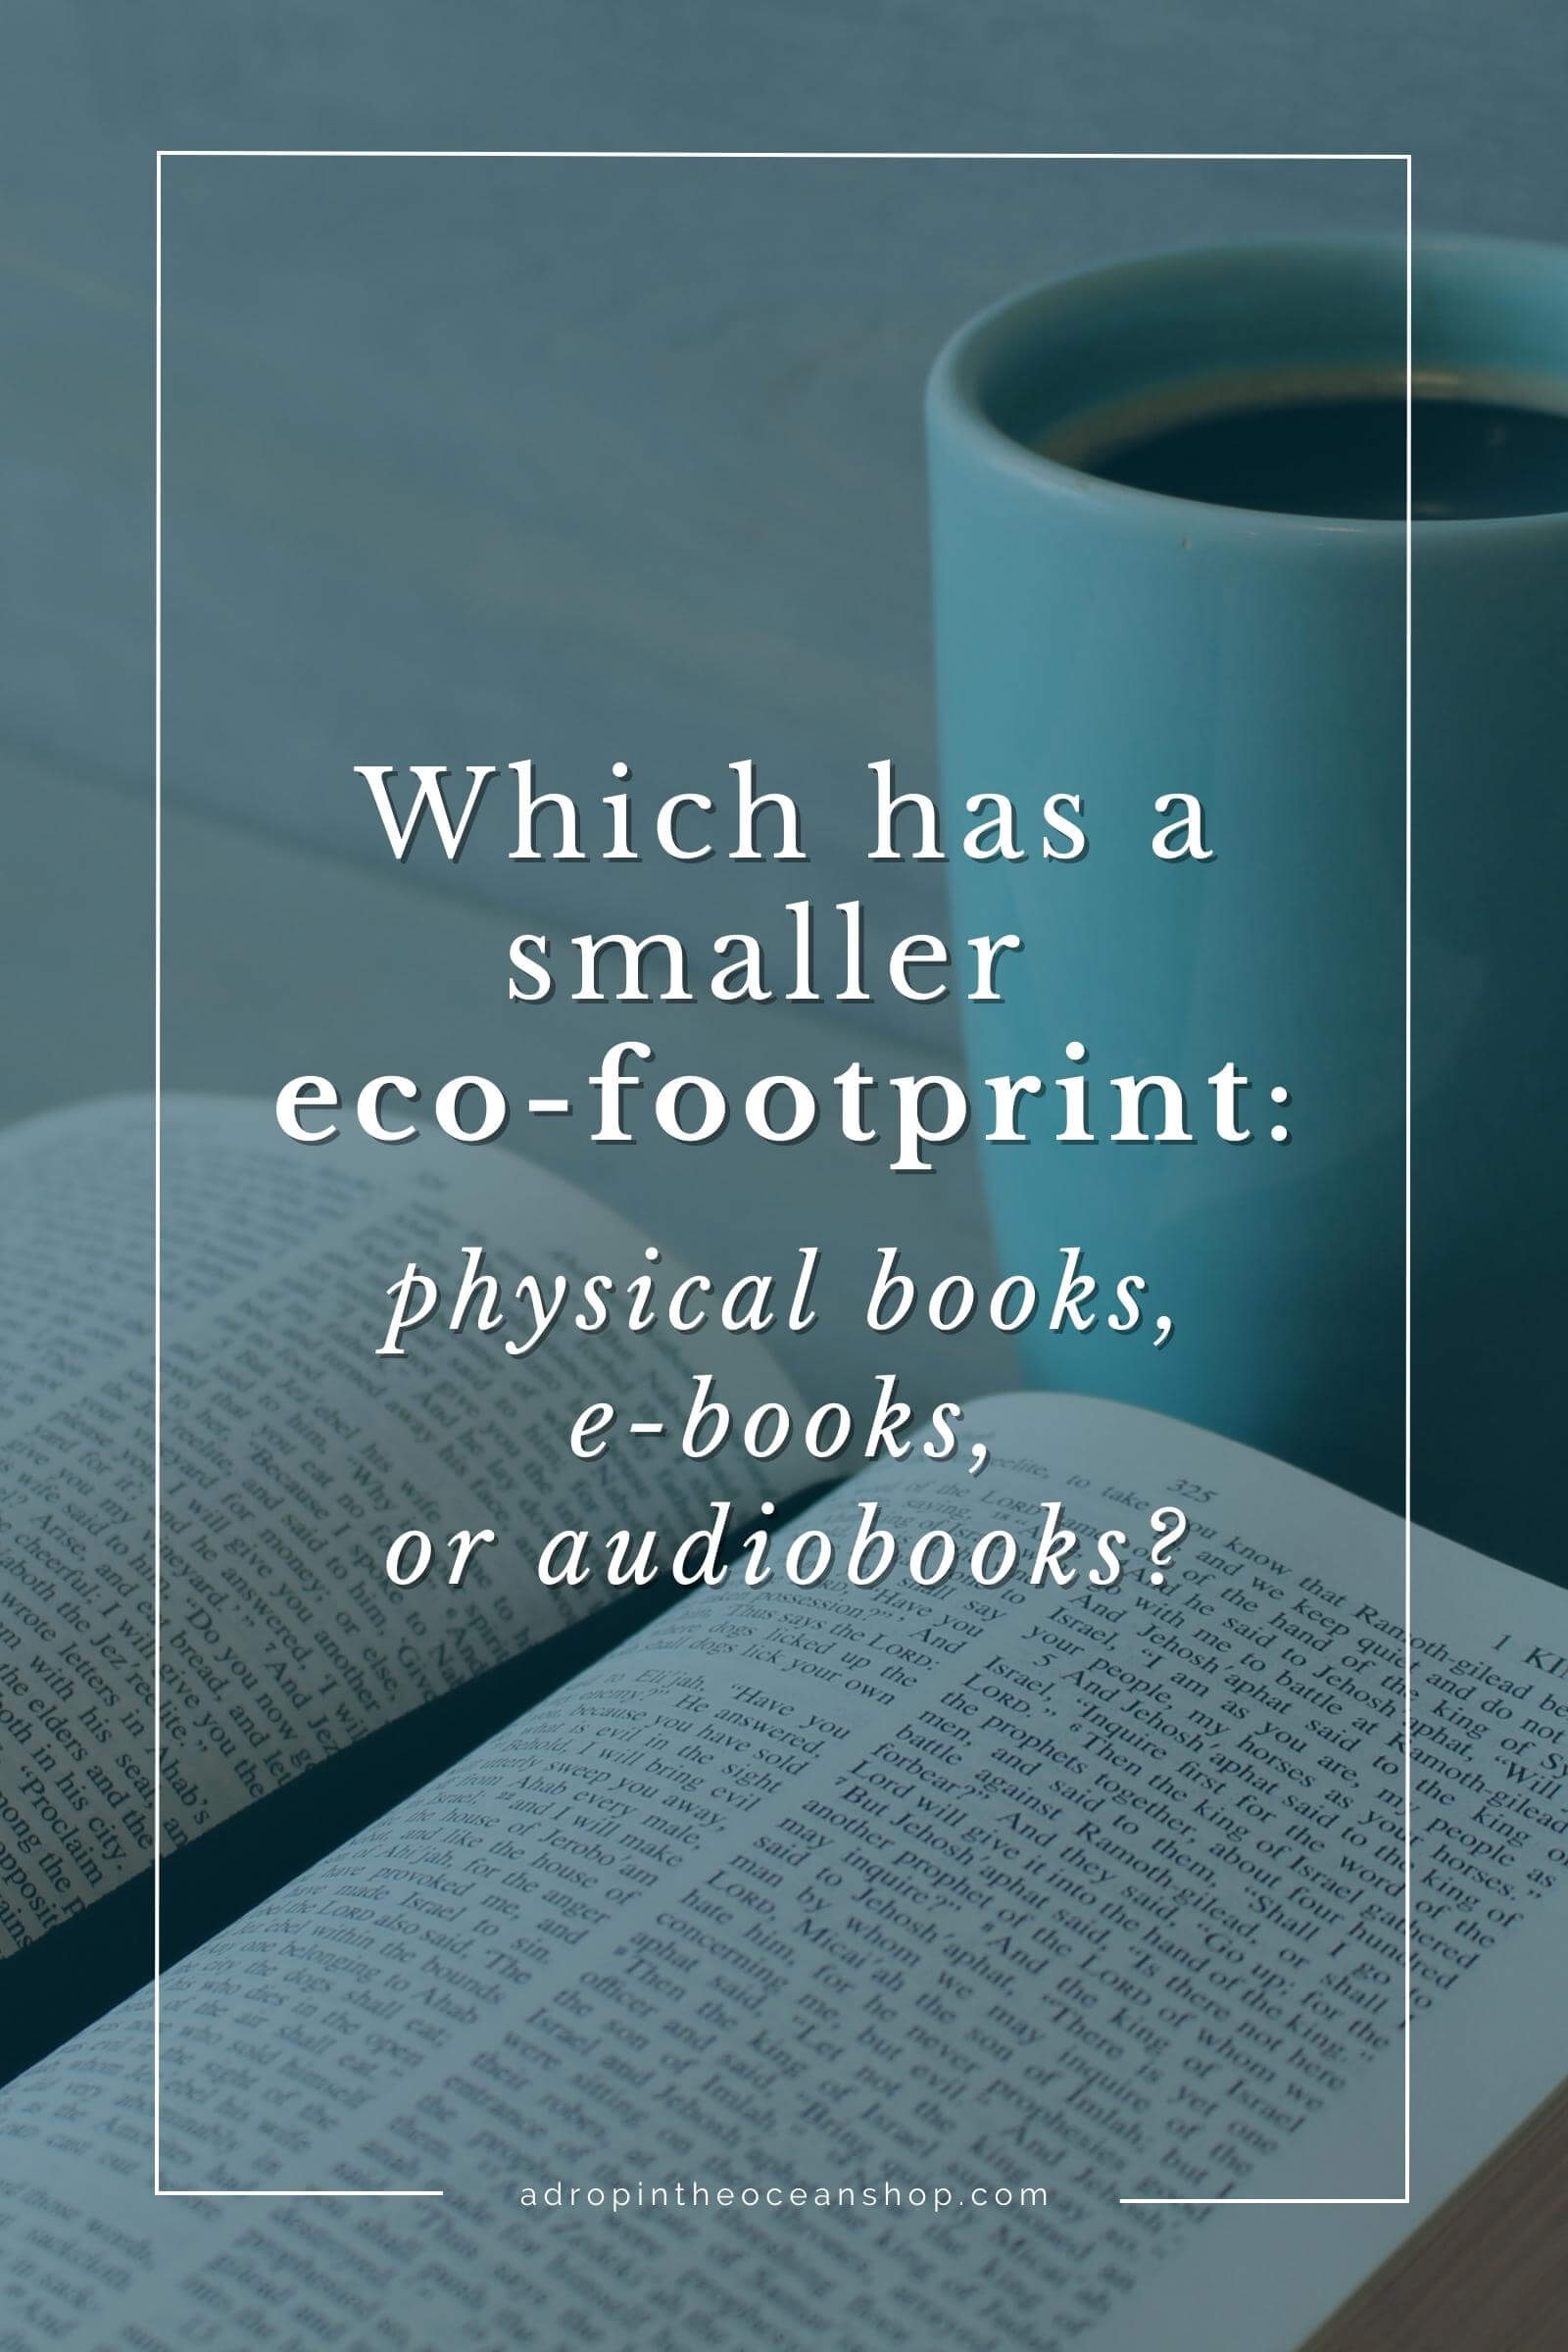 A Drop in the Ocean Blog: Which has a smaller eco-footprint - physical books, ebooks or audiobooks?